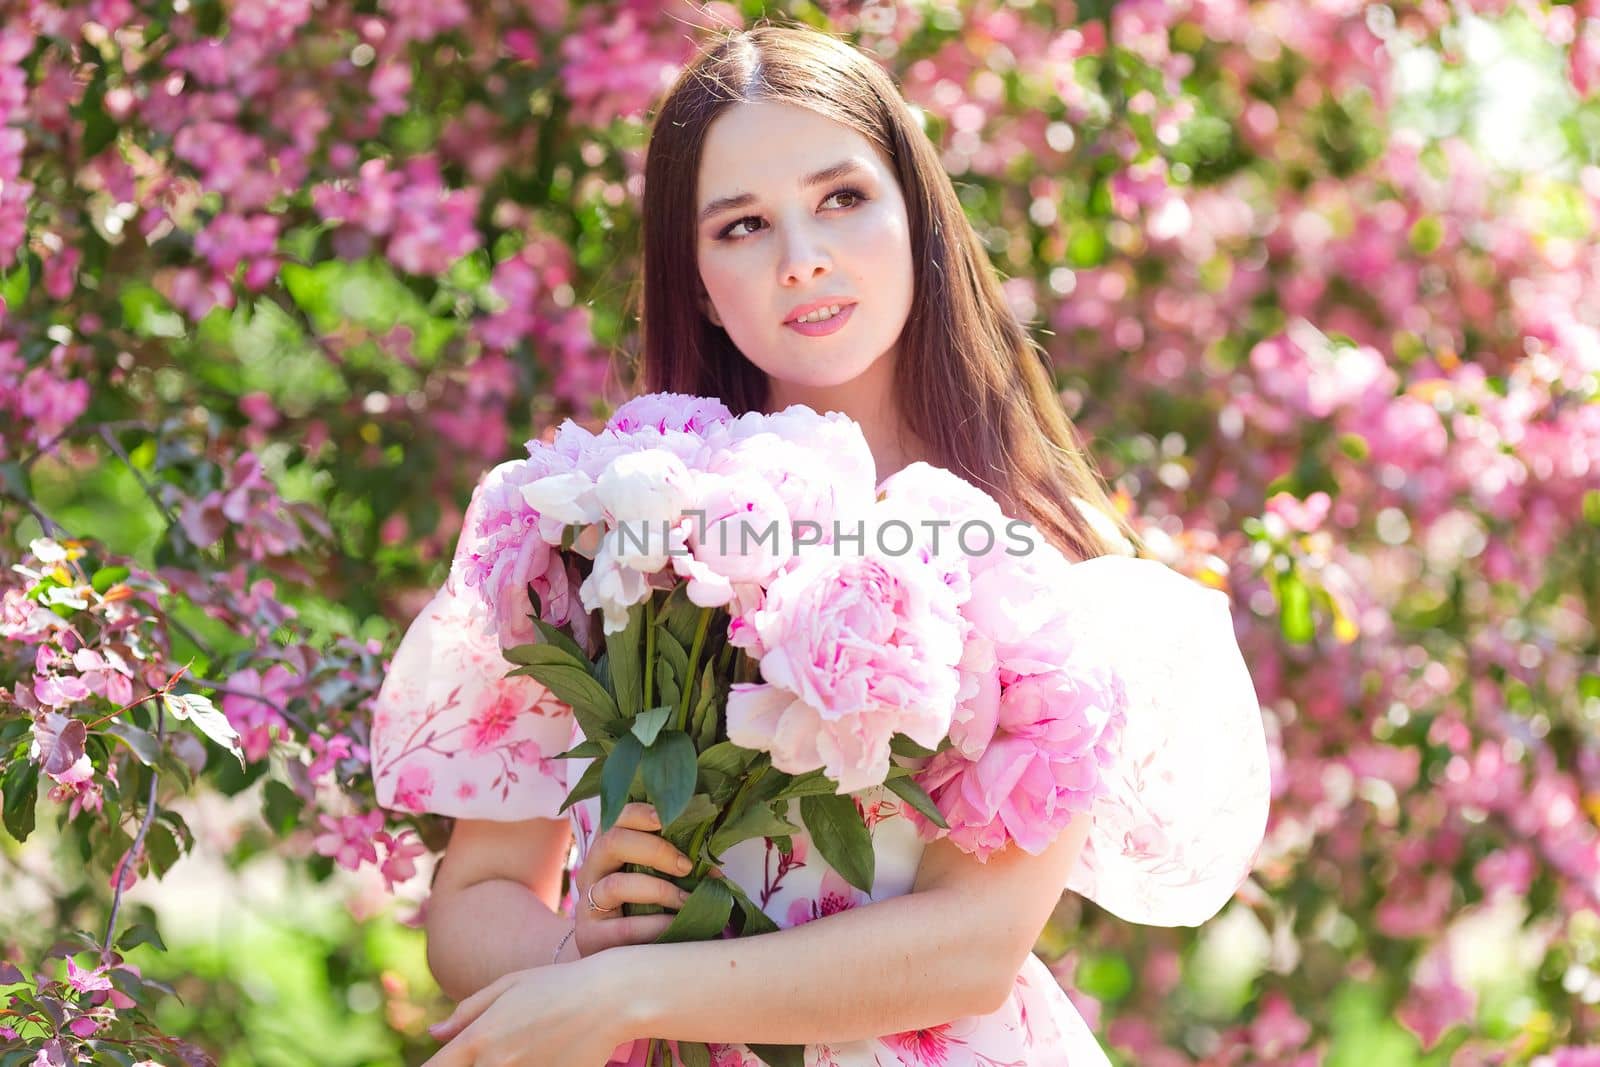 A portrait of a beautiful girl holding a large bouquet of pink peonies in her hands stands in a blooming garden on a sunny day. Copy space